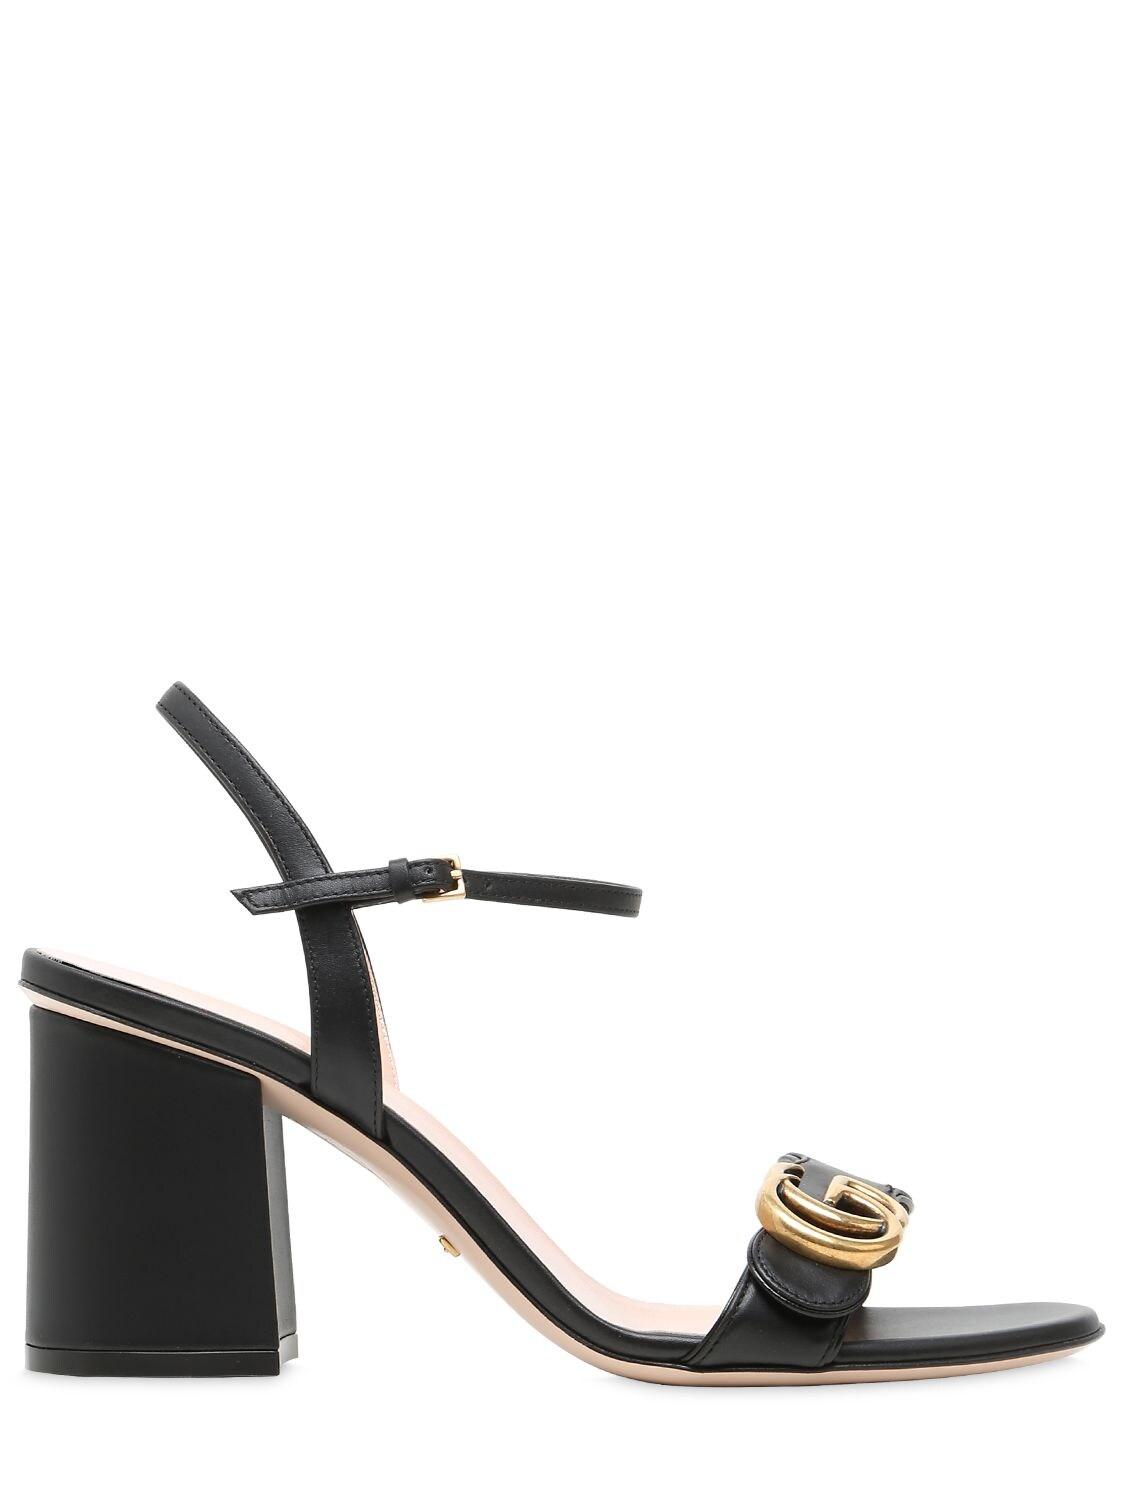 Gucci GG Marmont Block-heel Leather Sandals in Nero (Black) - Save 33% -  Lyst